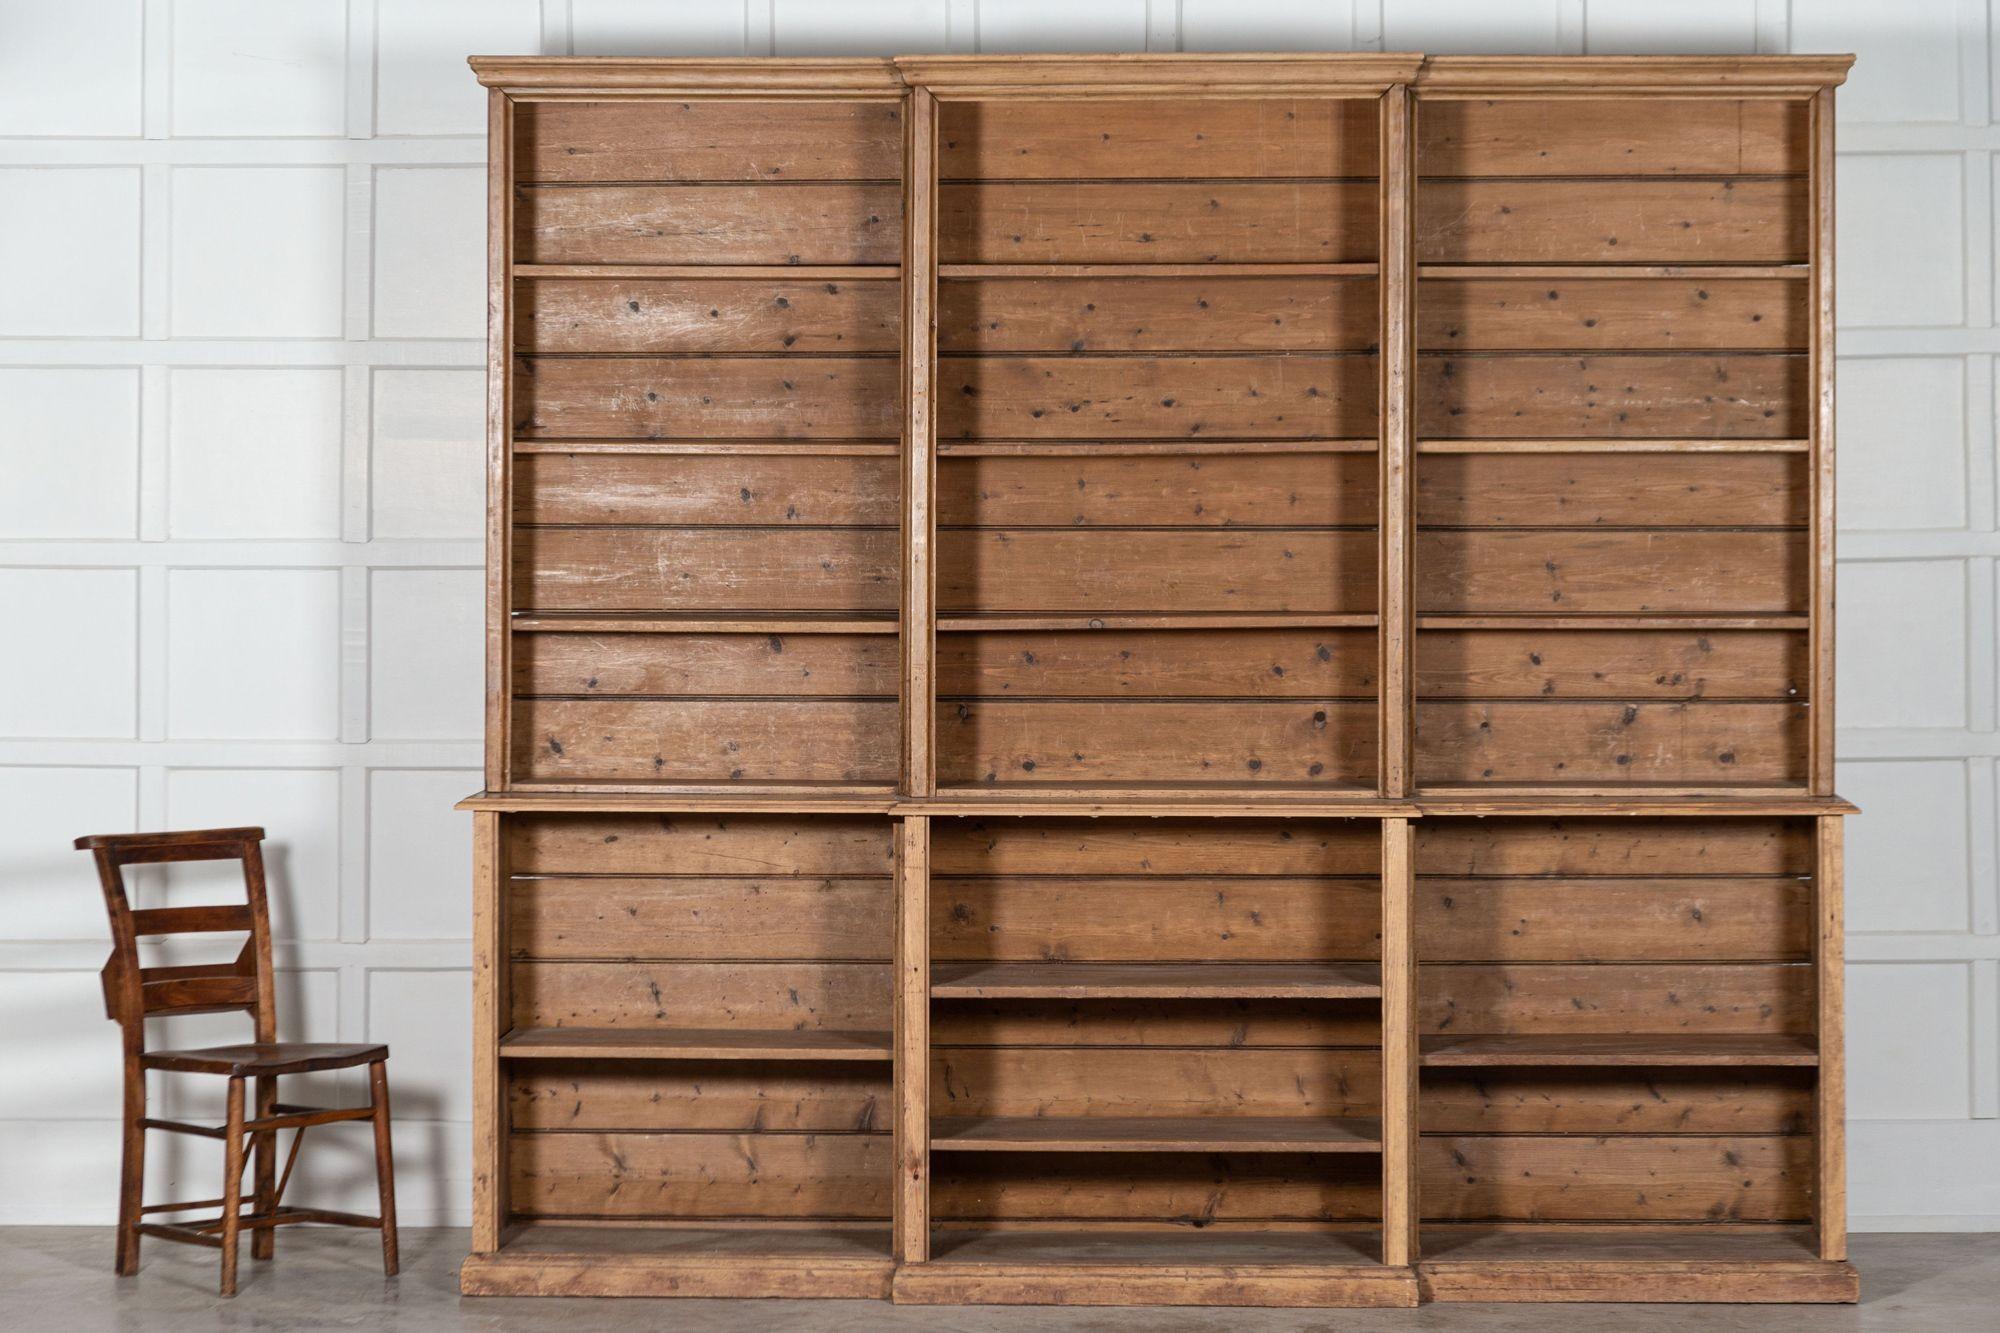 circa 1890
Large 19th century English pine breakfront bookcase
We can also customise existing pieces to suit your scheme/requirements. We have our own workshop, restorers and finishers. From adapting to finishing pieces including, stripping,